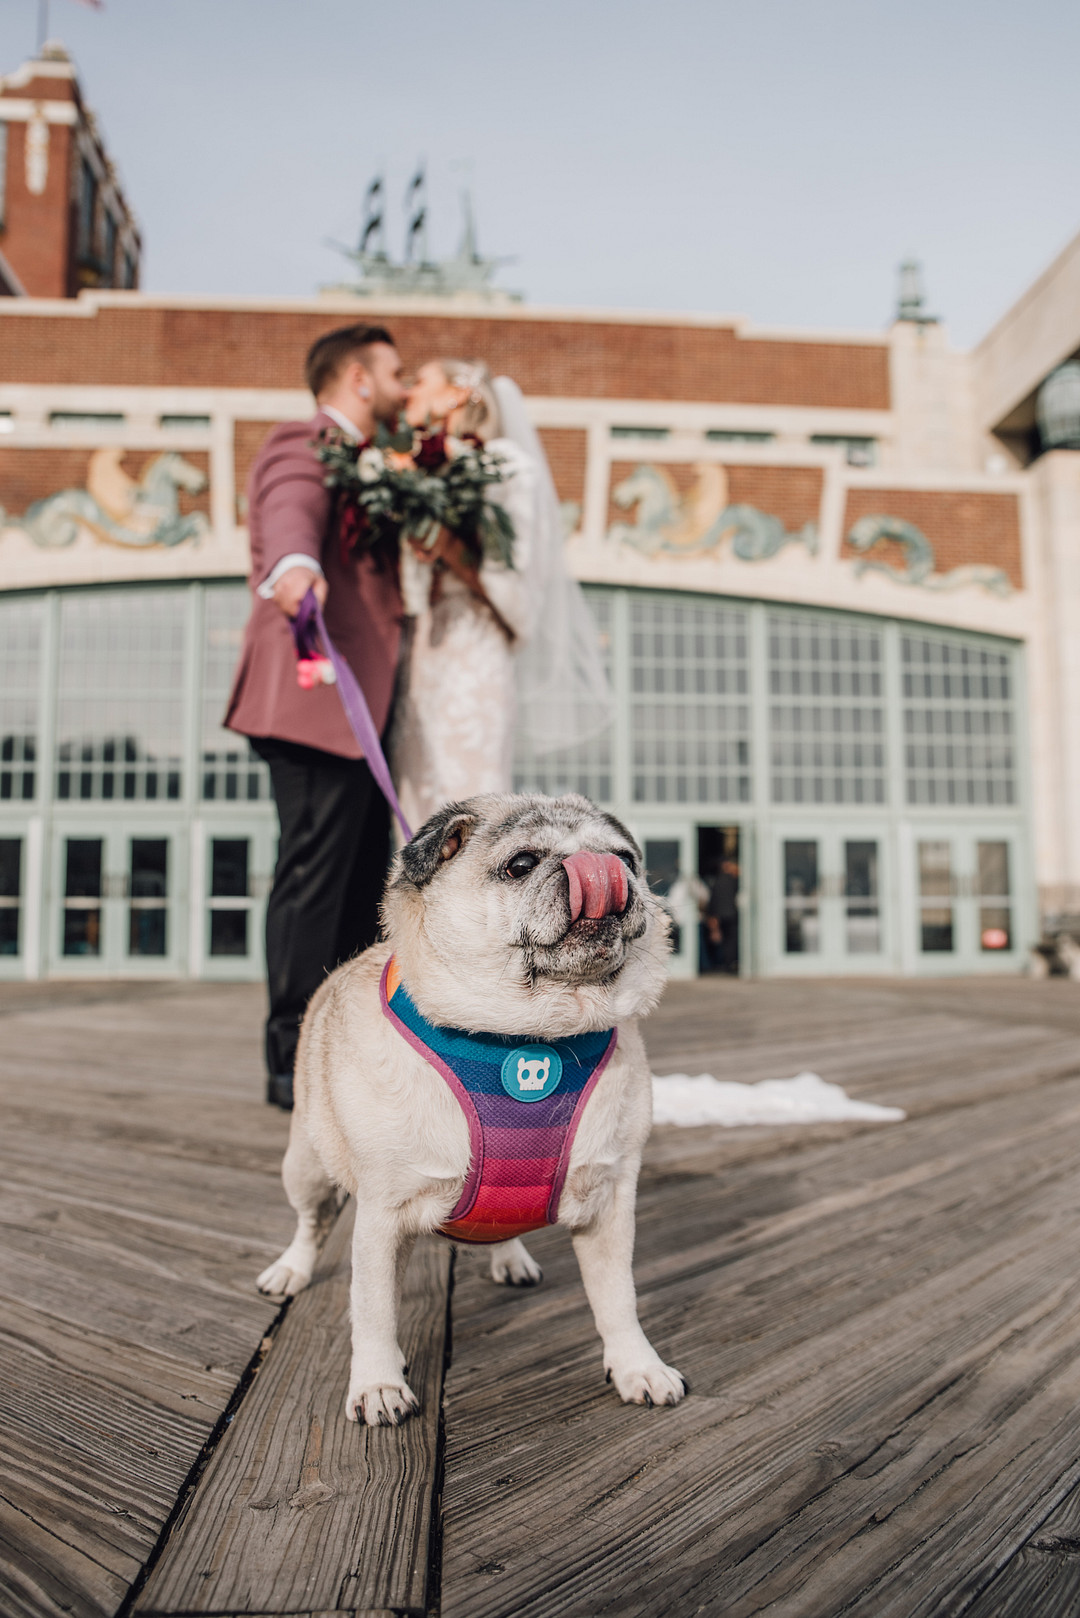 The couple's dog took part in the wedding, he was dressed in a funny colorful piece